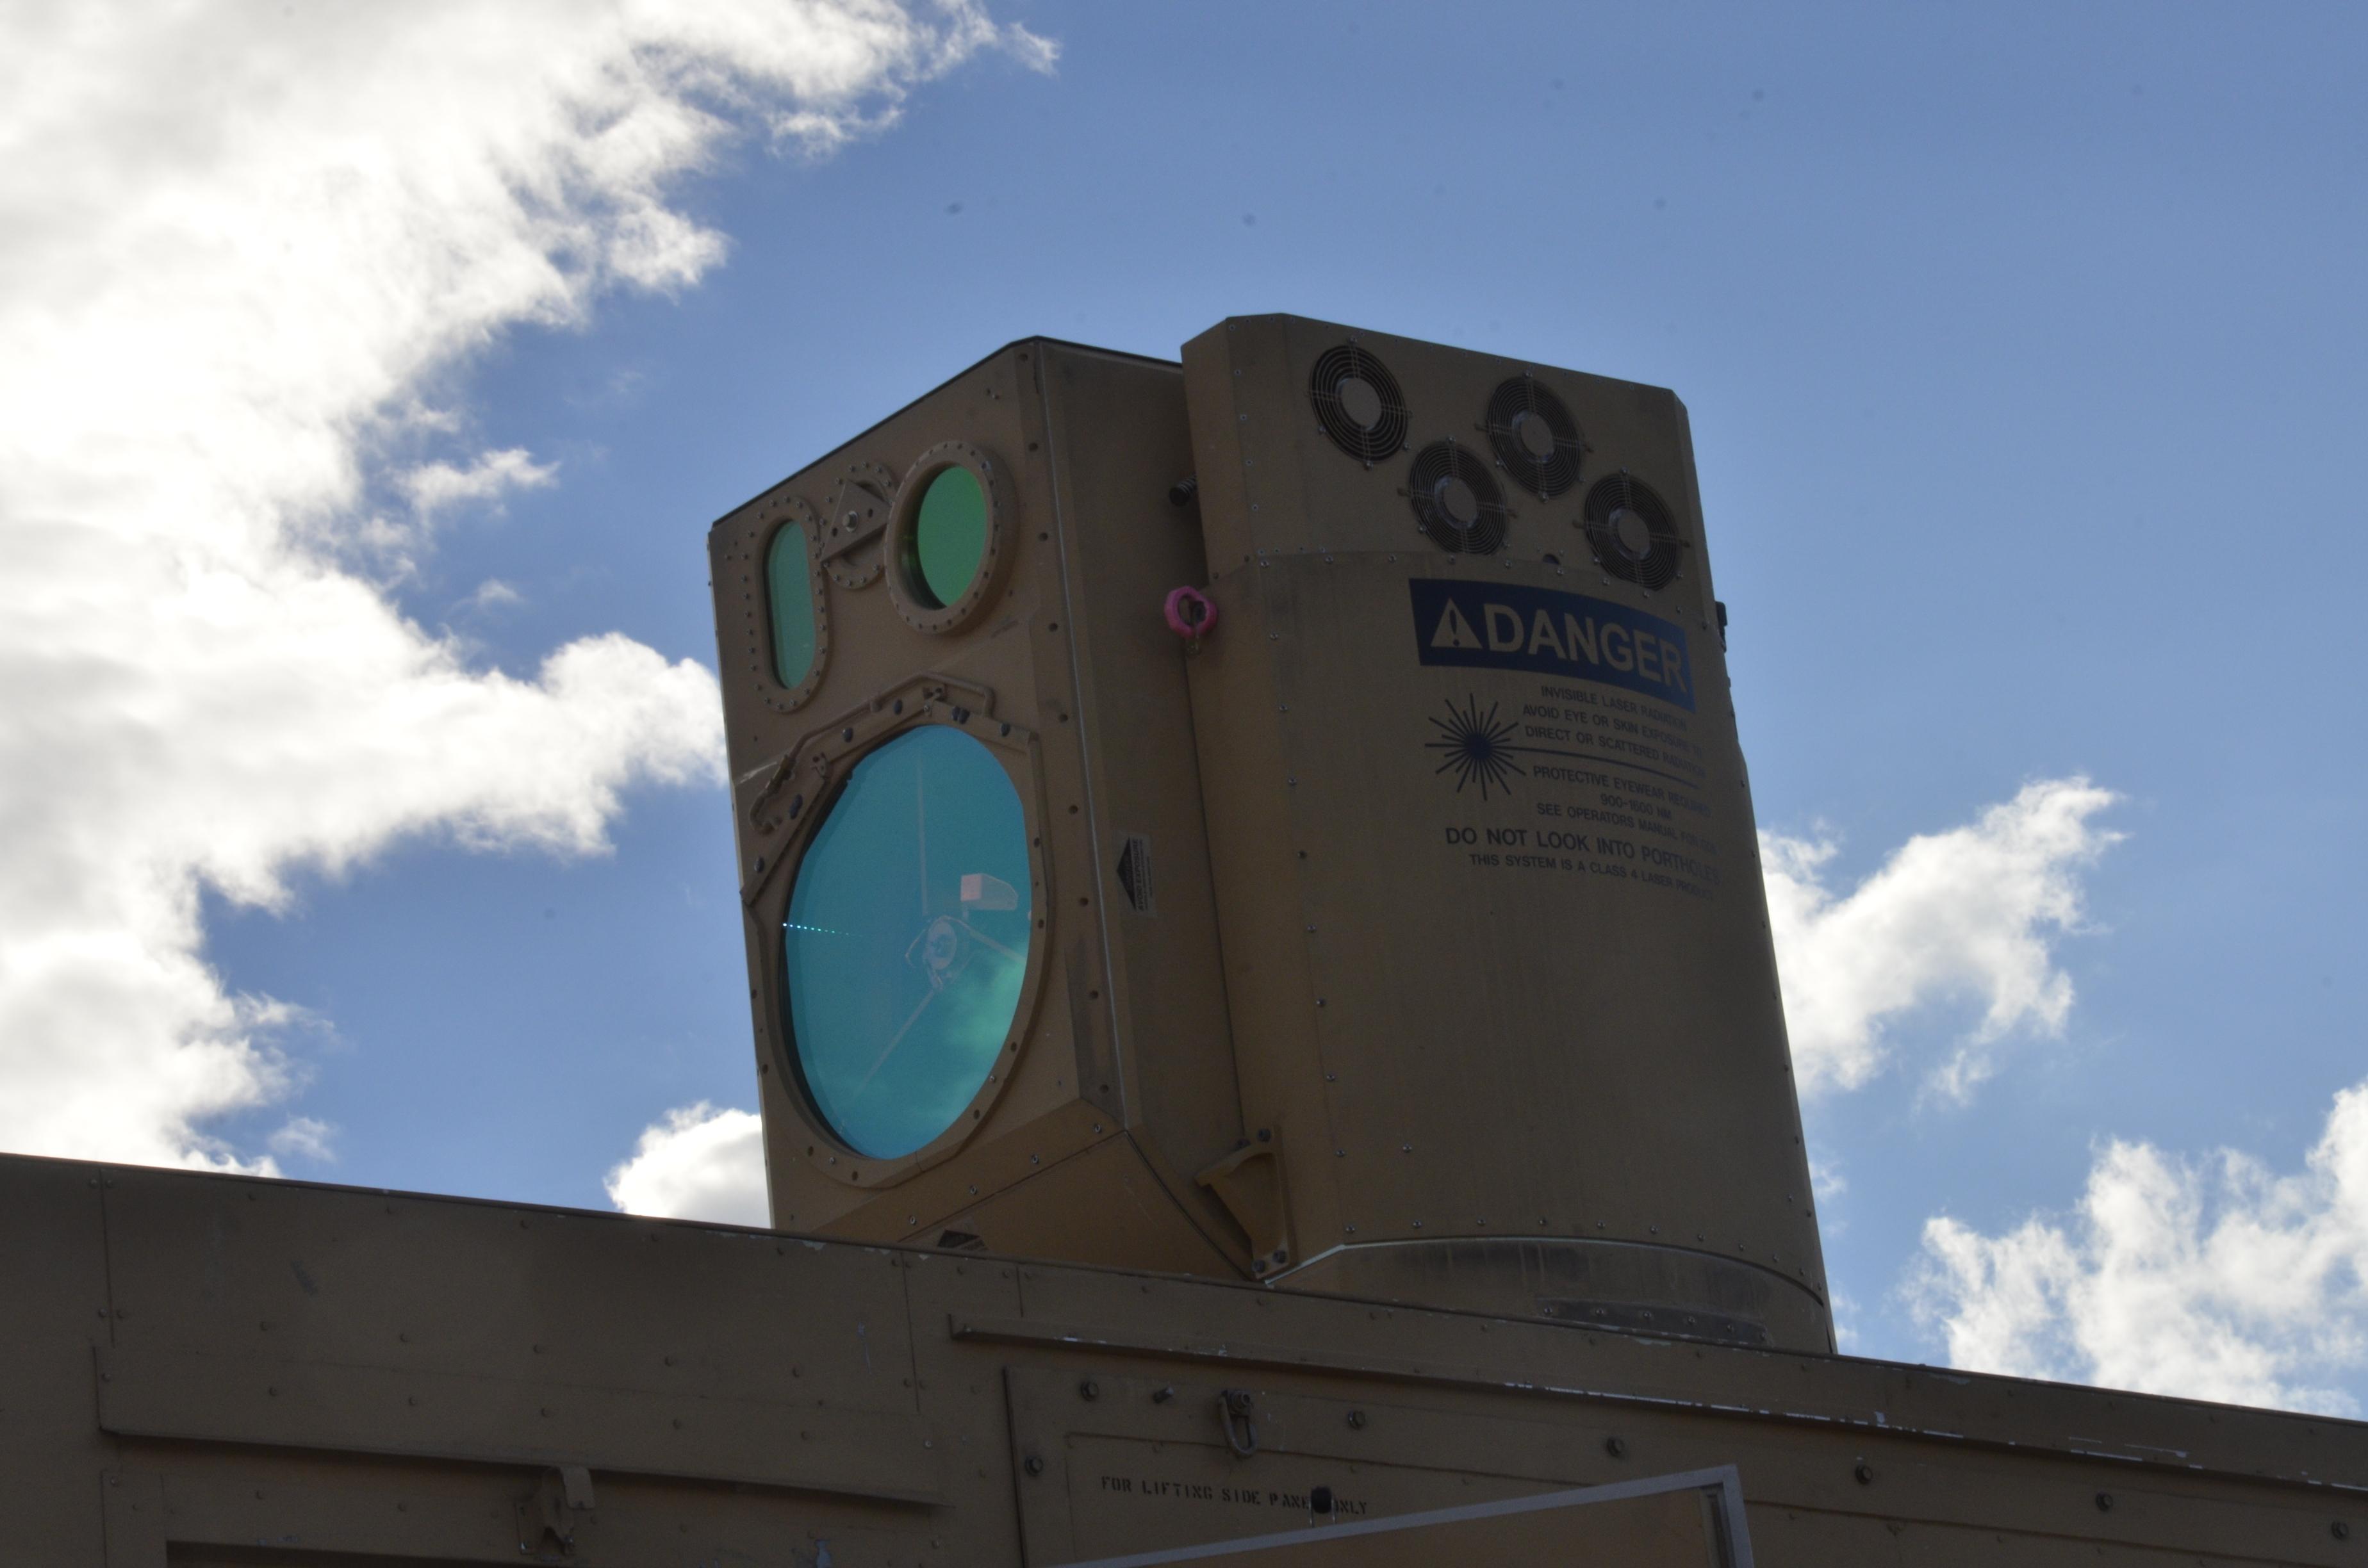 Close up the HEL-MD’s beam director. The beam director is a fast tracking turret system allowing the laser to engaged small fast targets like mortar and artillery fire.